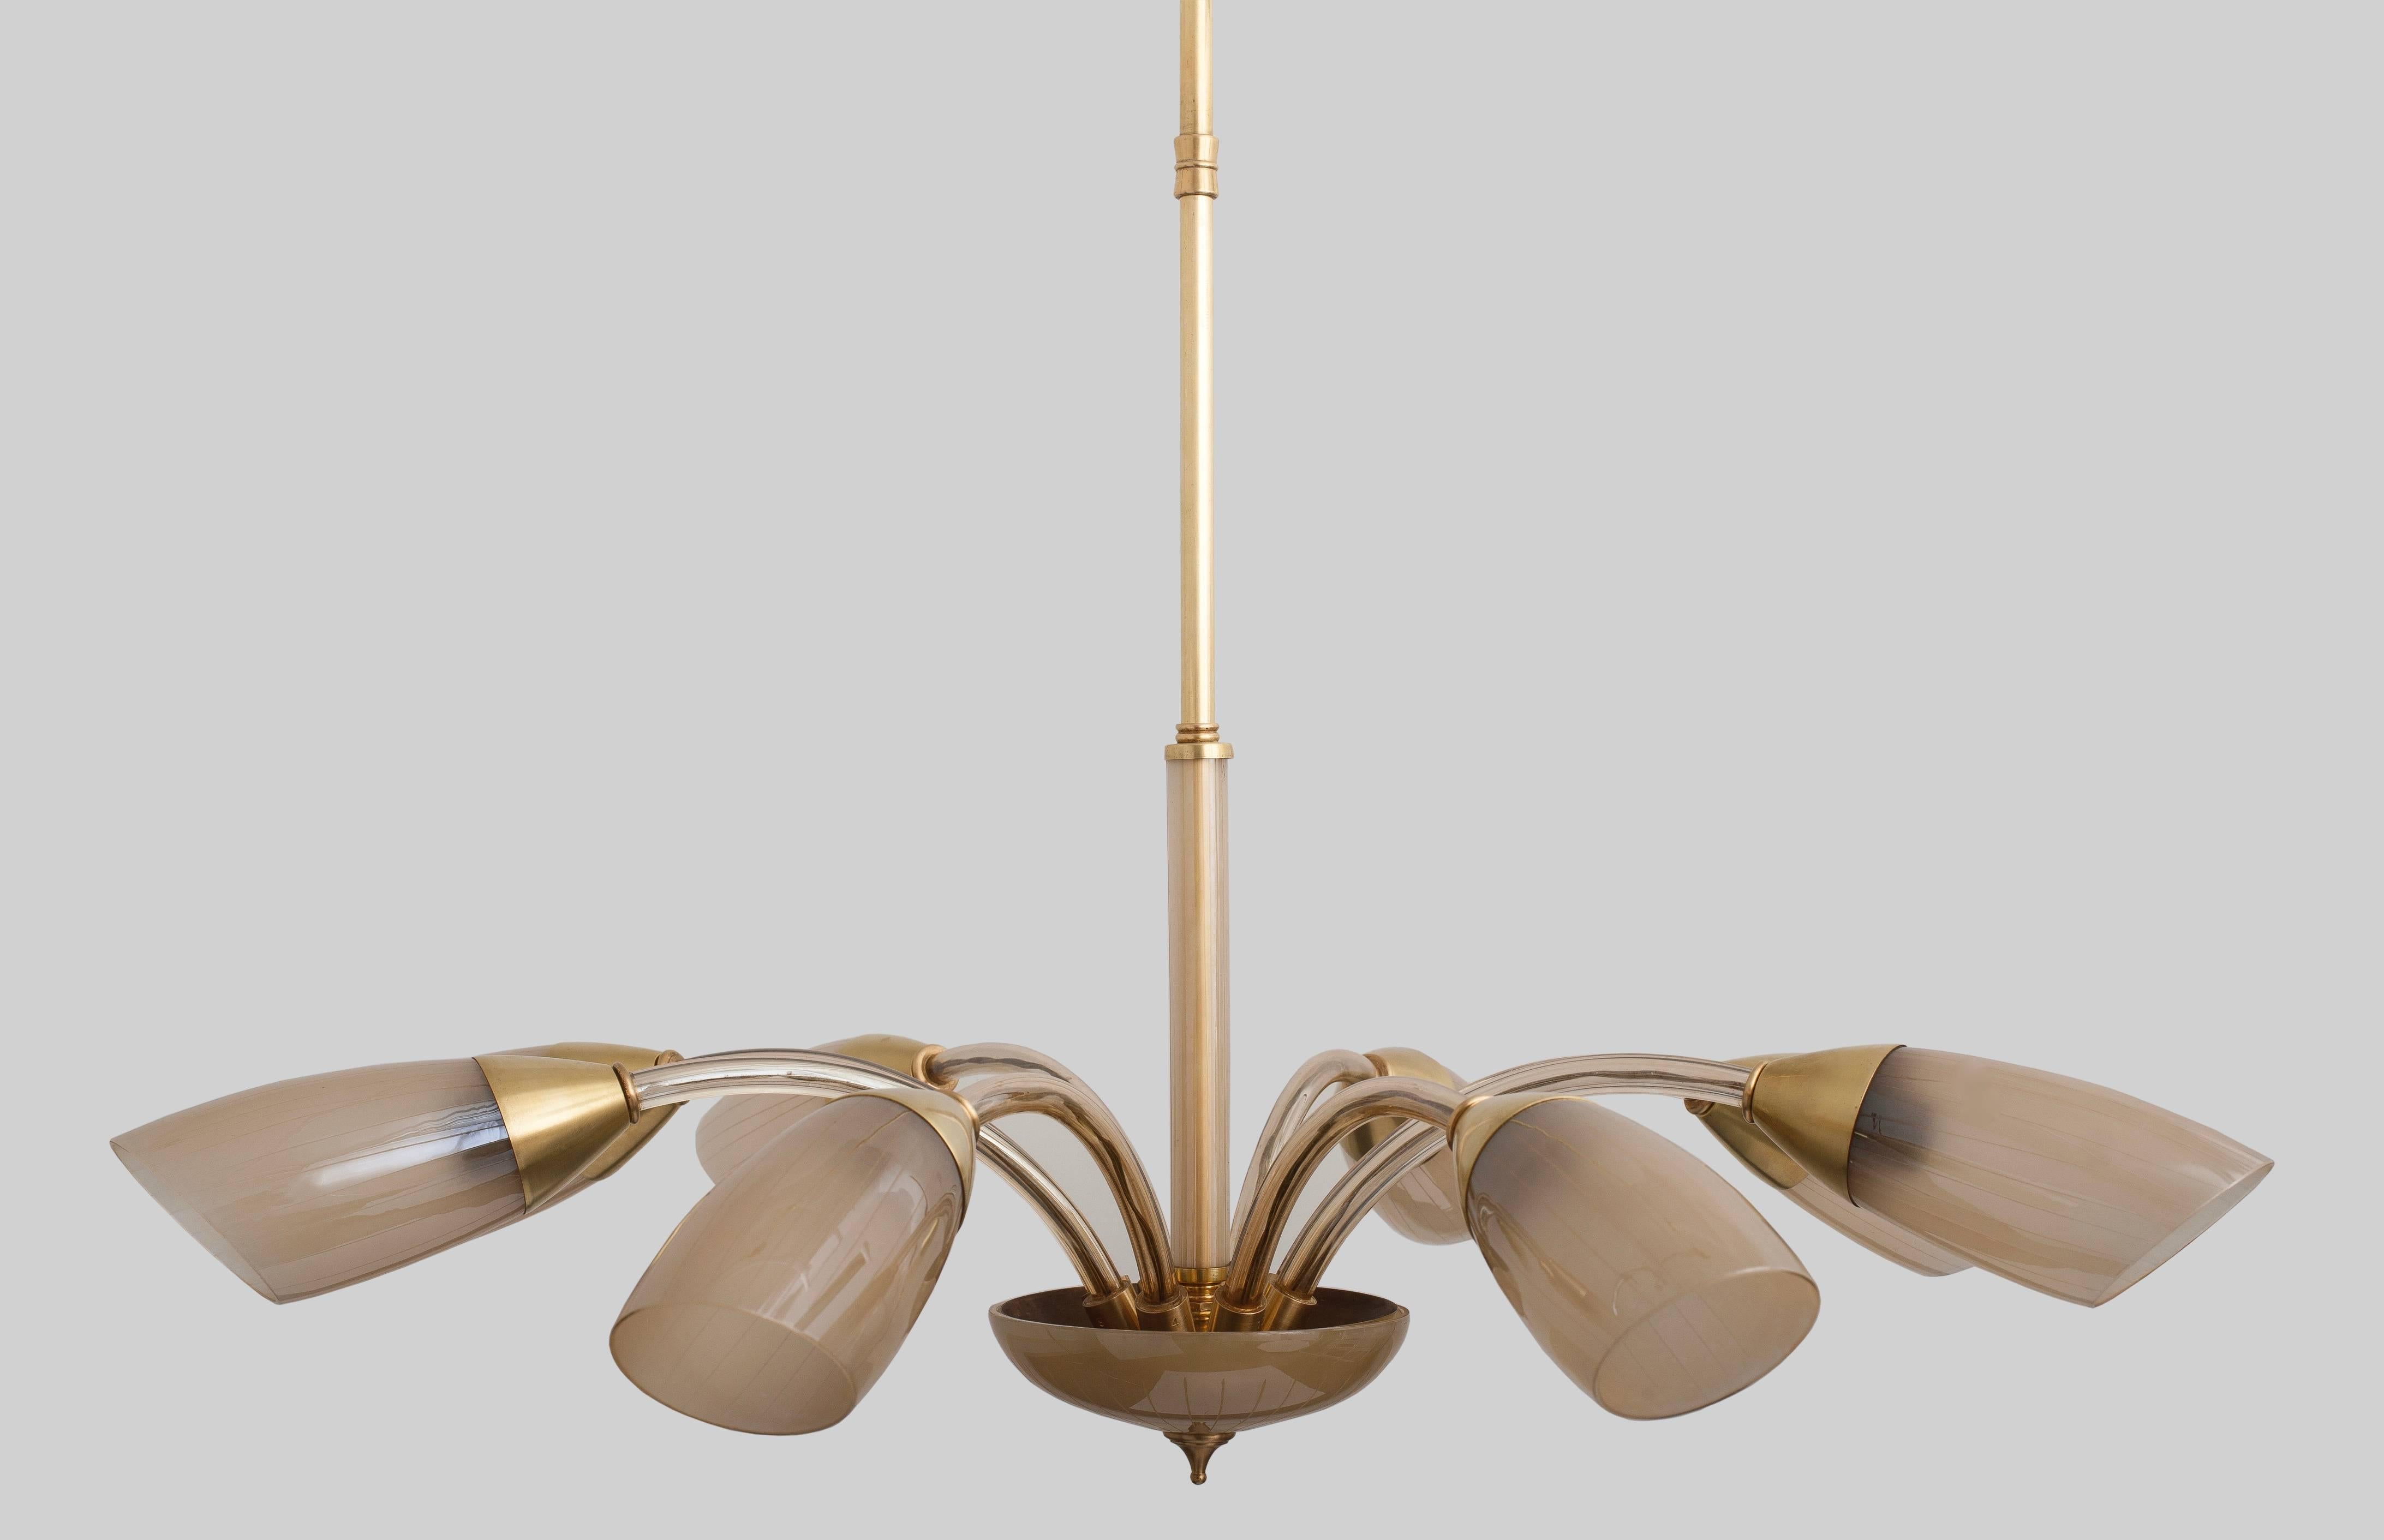 Italian chandelier with eight arms.
Made with glass and brass.
